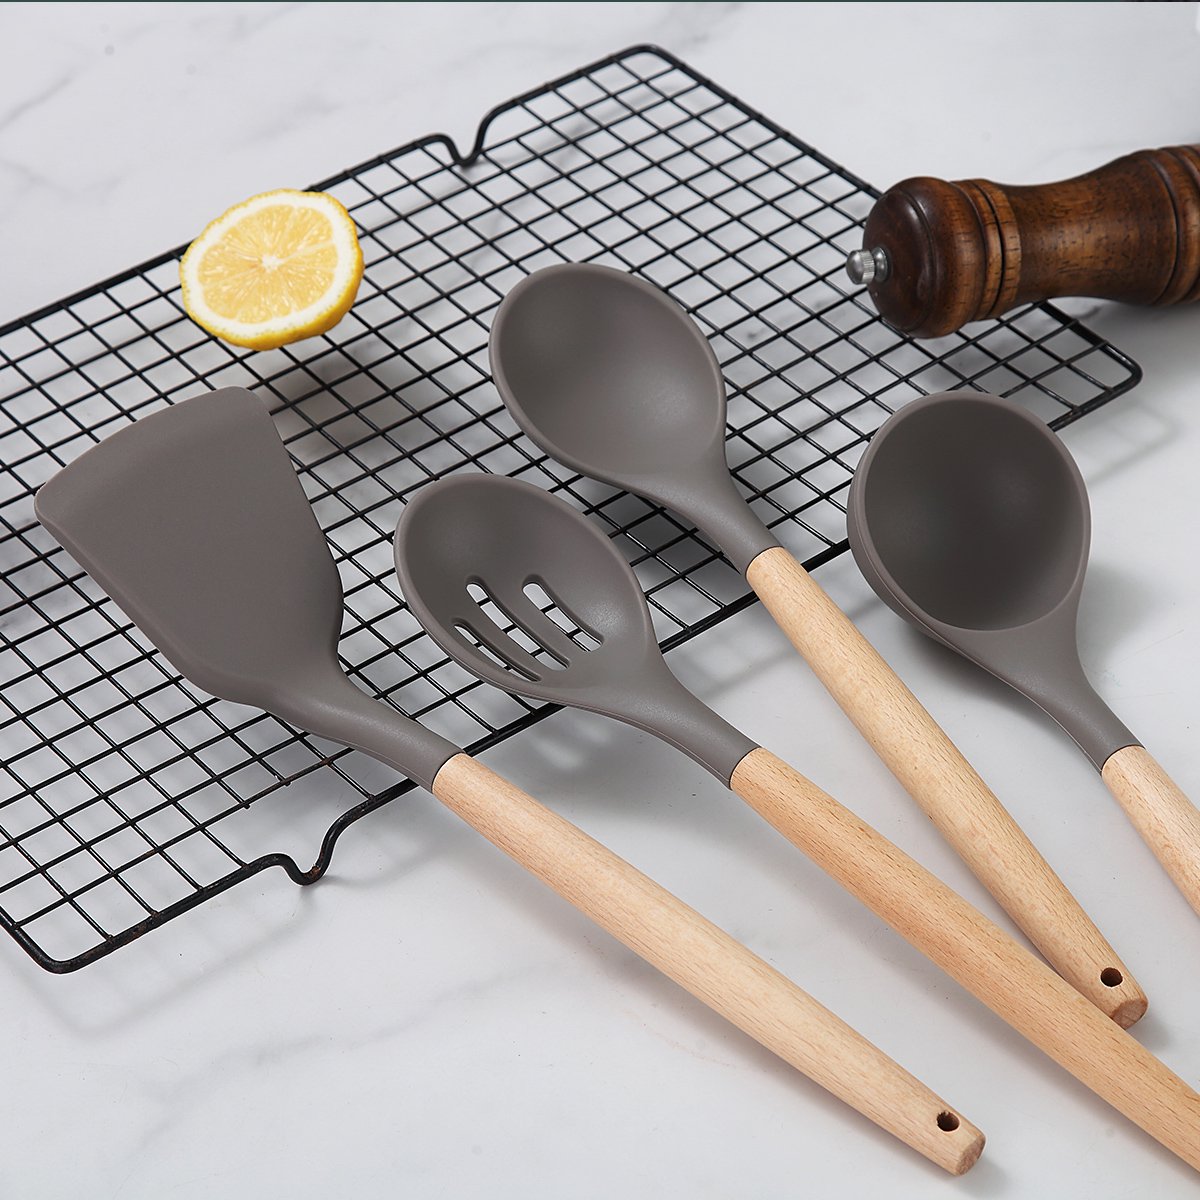 US$ 34.99 - Cooking Utensils Set, 38 Pieces Silicone Kitchen Utensil With  Holder - m.